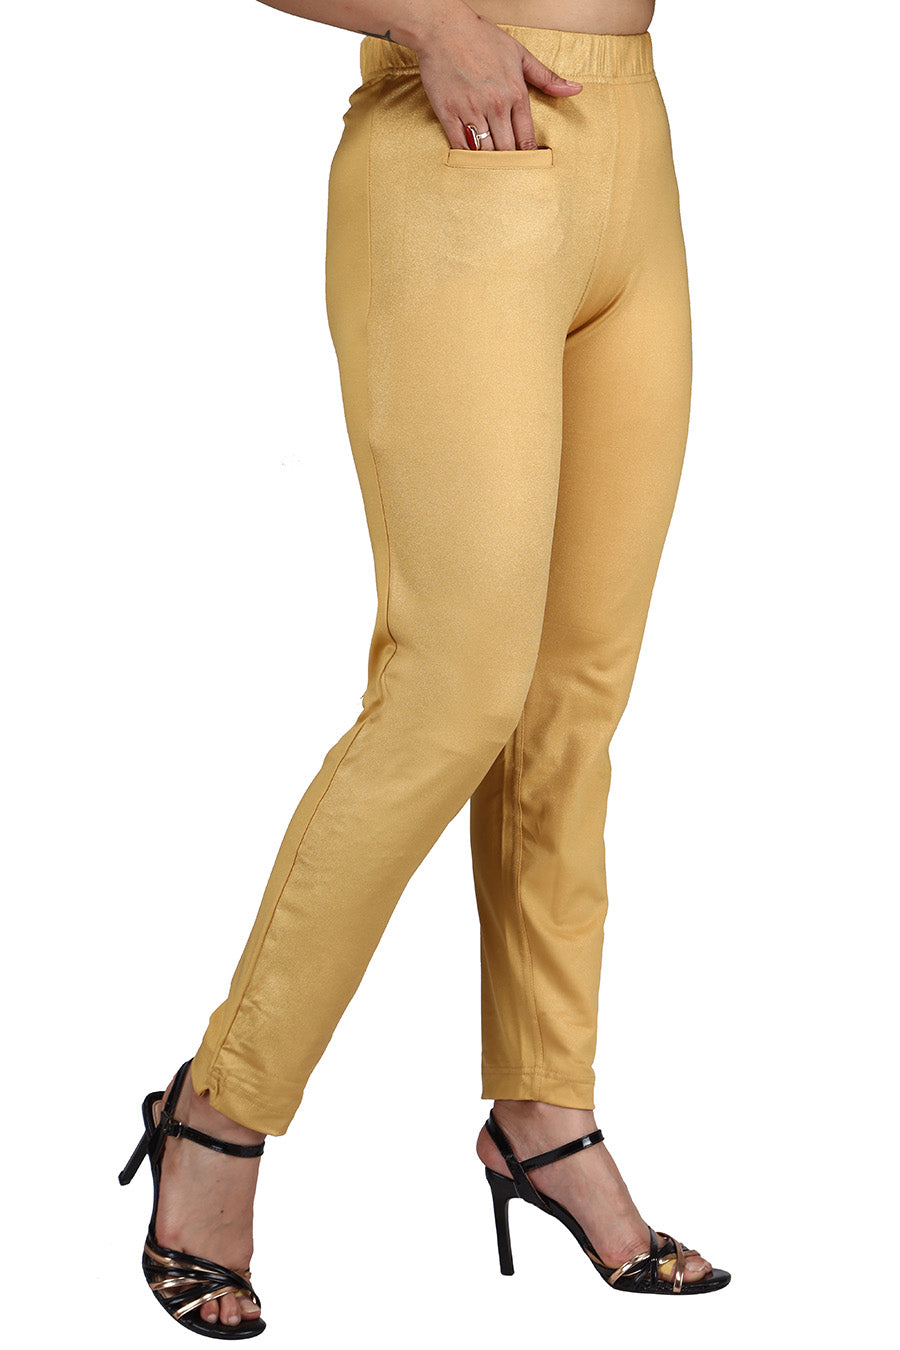 Comfort Lady Shimmer Kurti Pants - Comfort Lady Private Limited